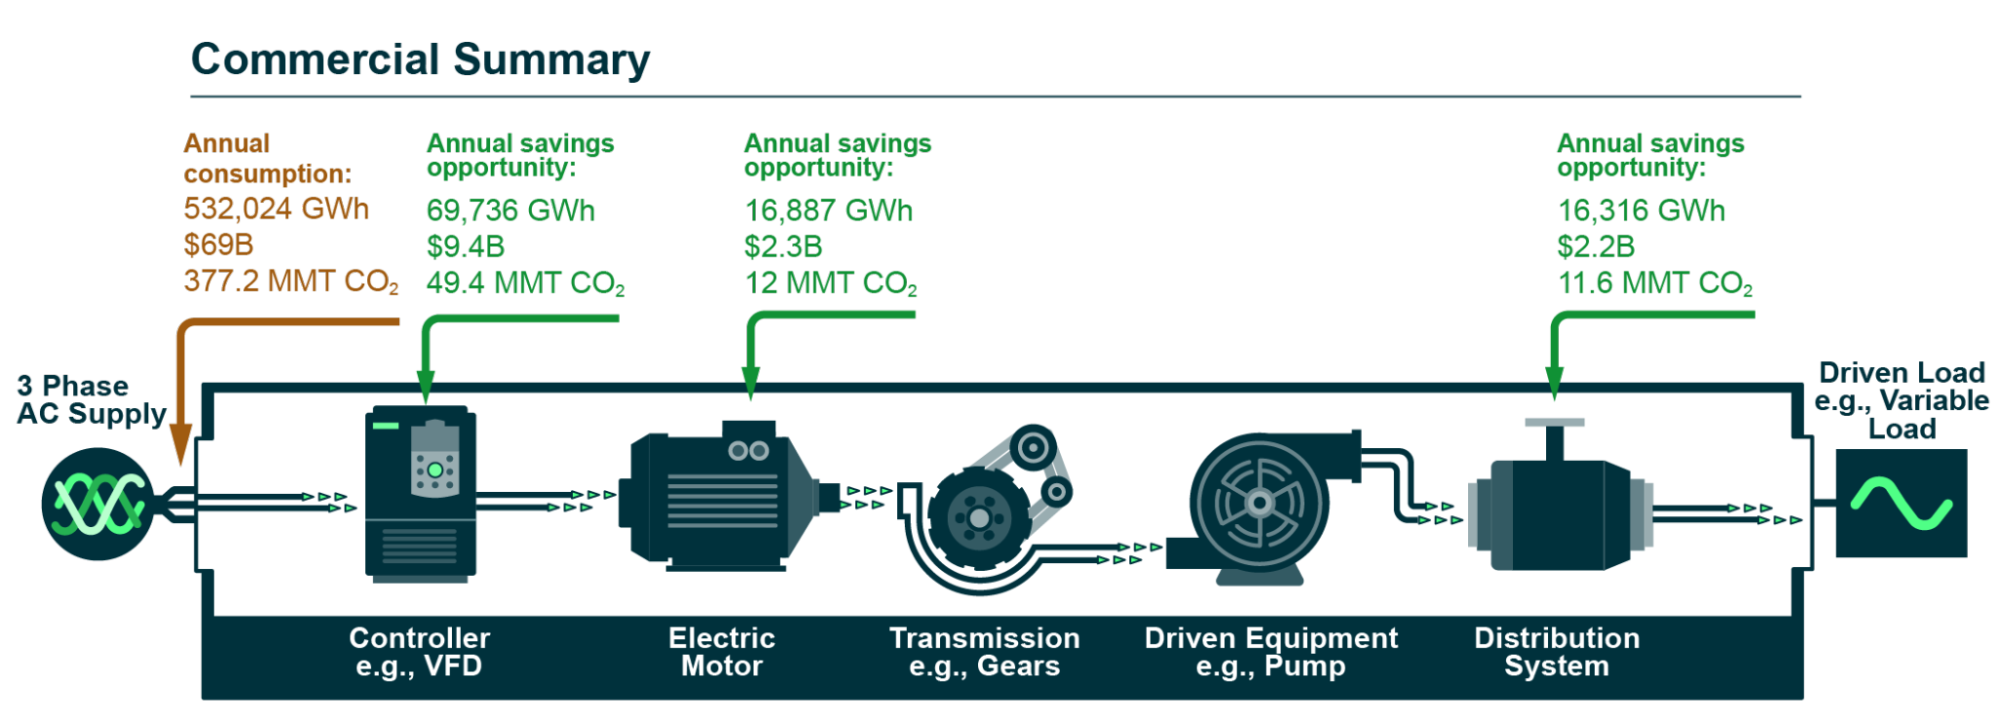 The illustration depicts the chain of components in an commercial motor system, from drive to the motor to the motor-driven equipment (such as pumps, fans, etc.) and the distribution systems that receive the fluids and other materials driven by the system.